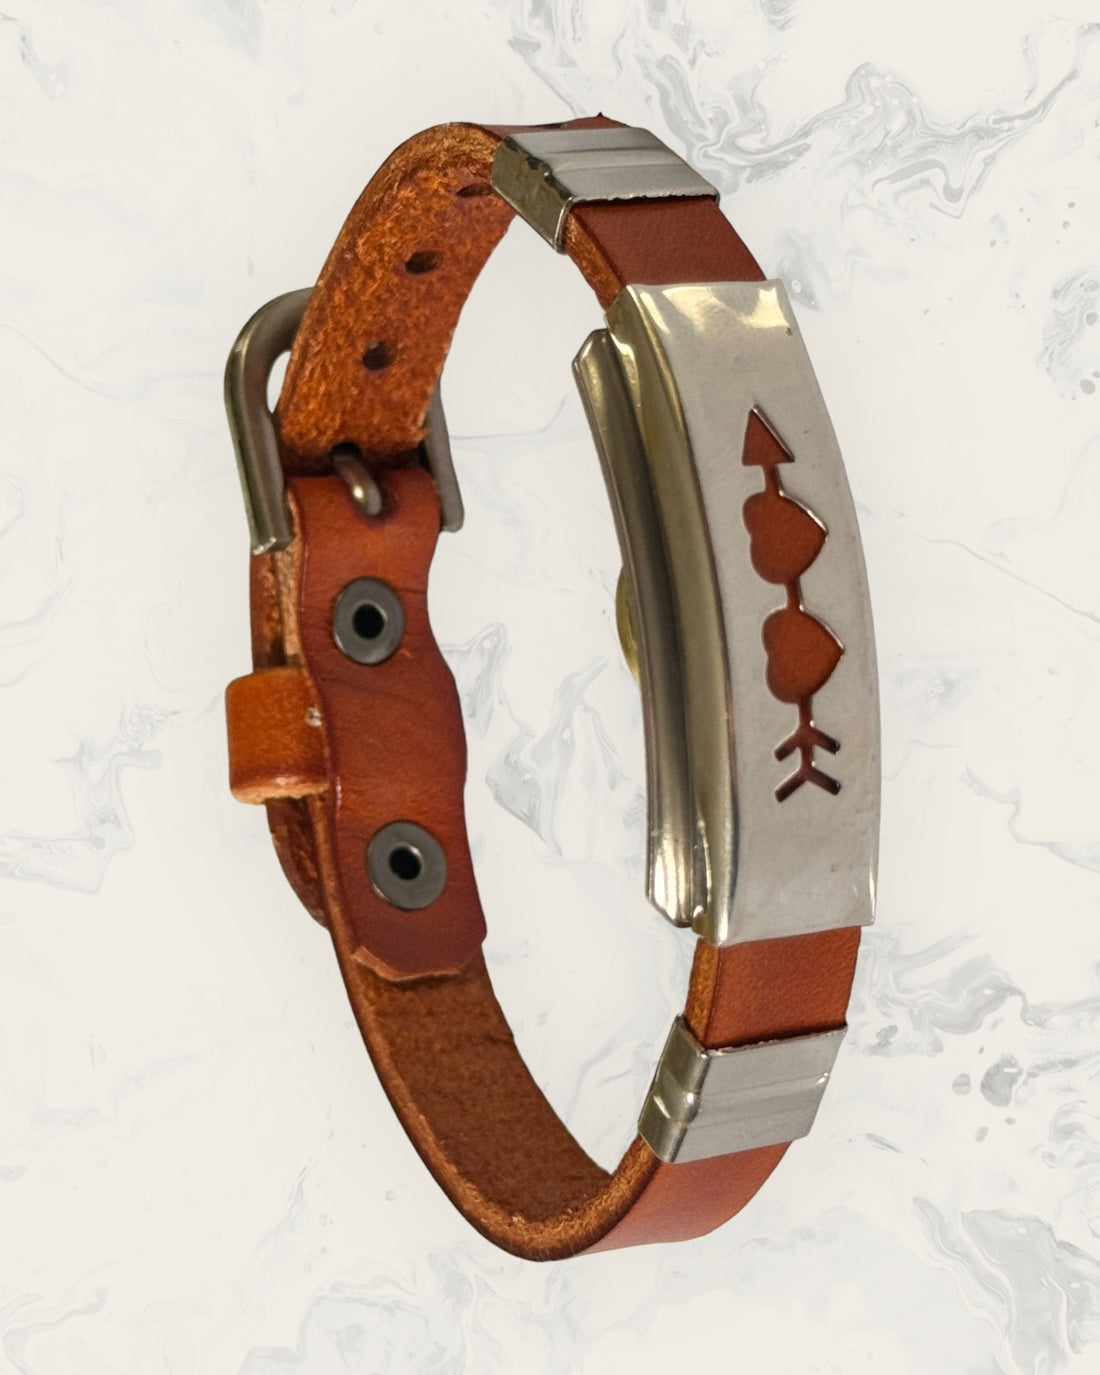 Natural Pain Relief and EMF Protection Bracelet Leather Band Color Burnt Orange with Two Hearts and an arrow design on a silver metal slider